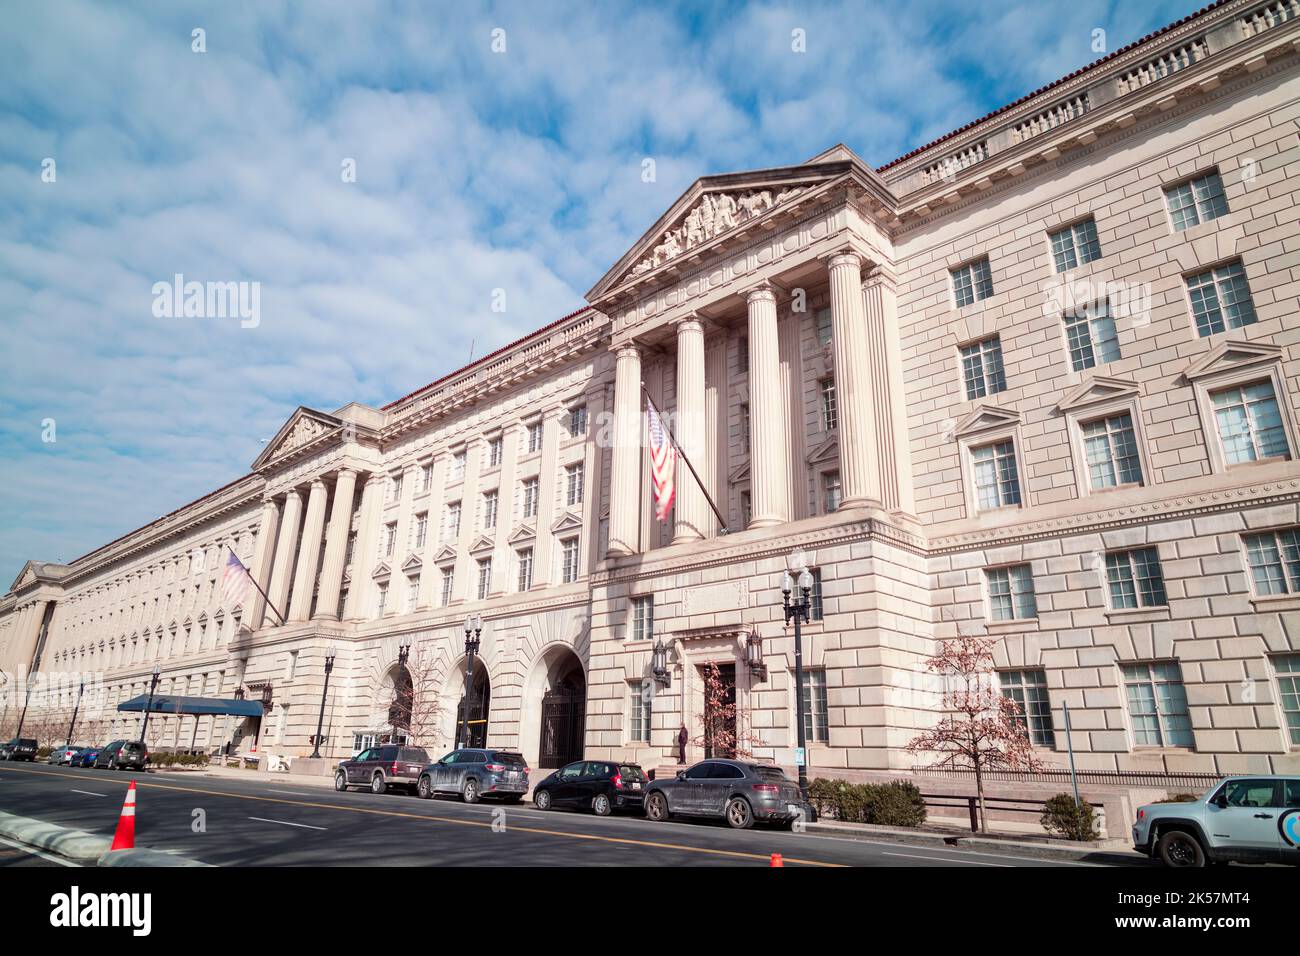 The United States Department of Commerce Herbert C. Hoover Building in Washington, DC, as seen from 15th street NW and Constitution Avenue NW. Stock Photo